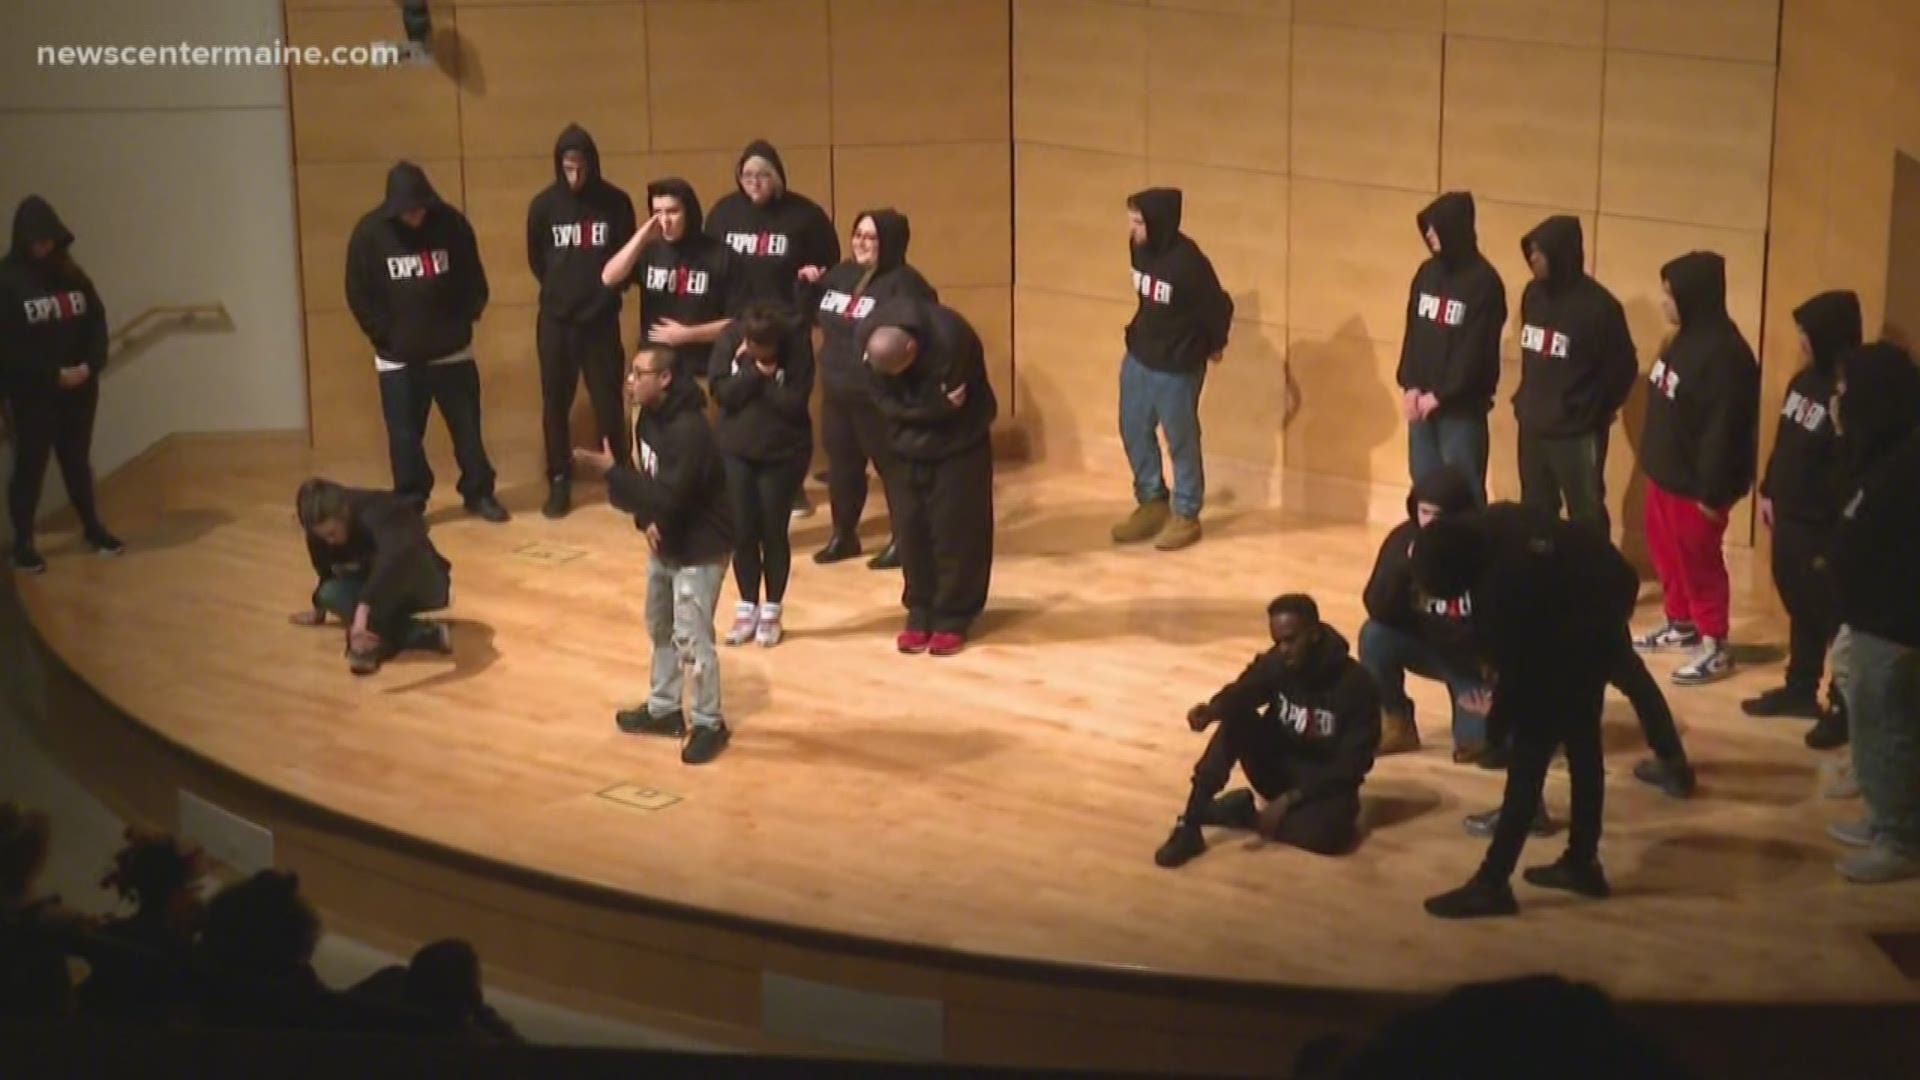 A group of people who share experiences in youth incarceration tell their stories on stage.